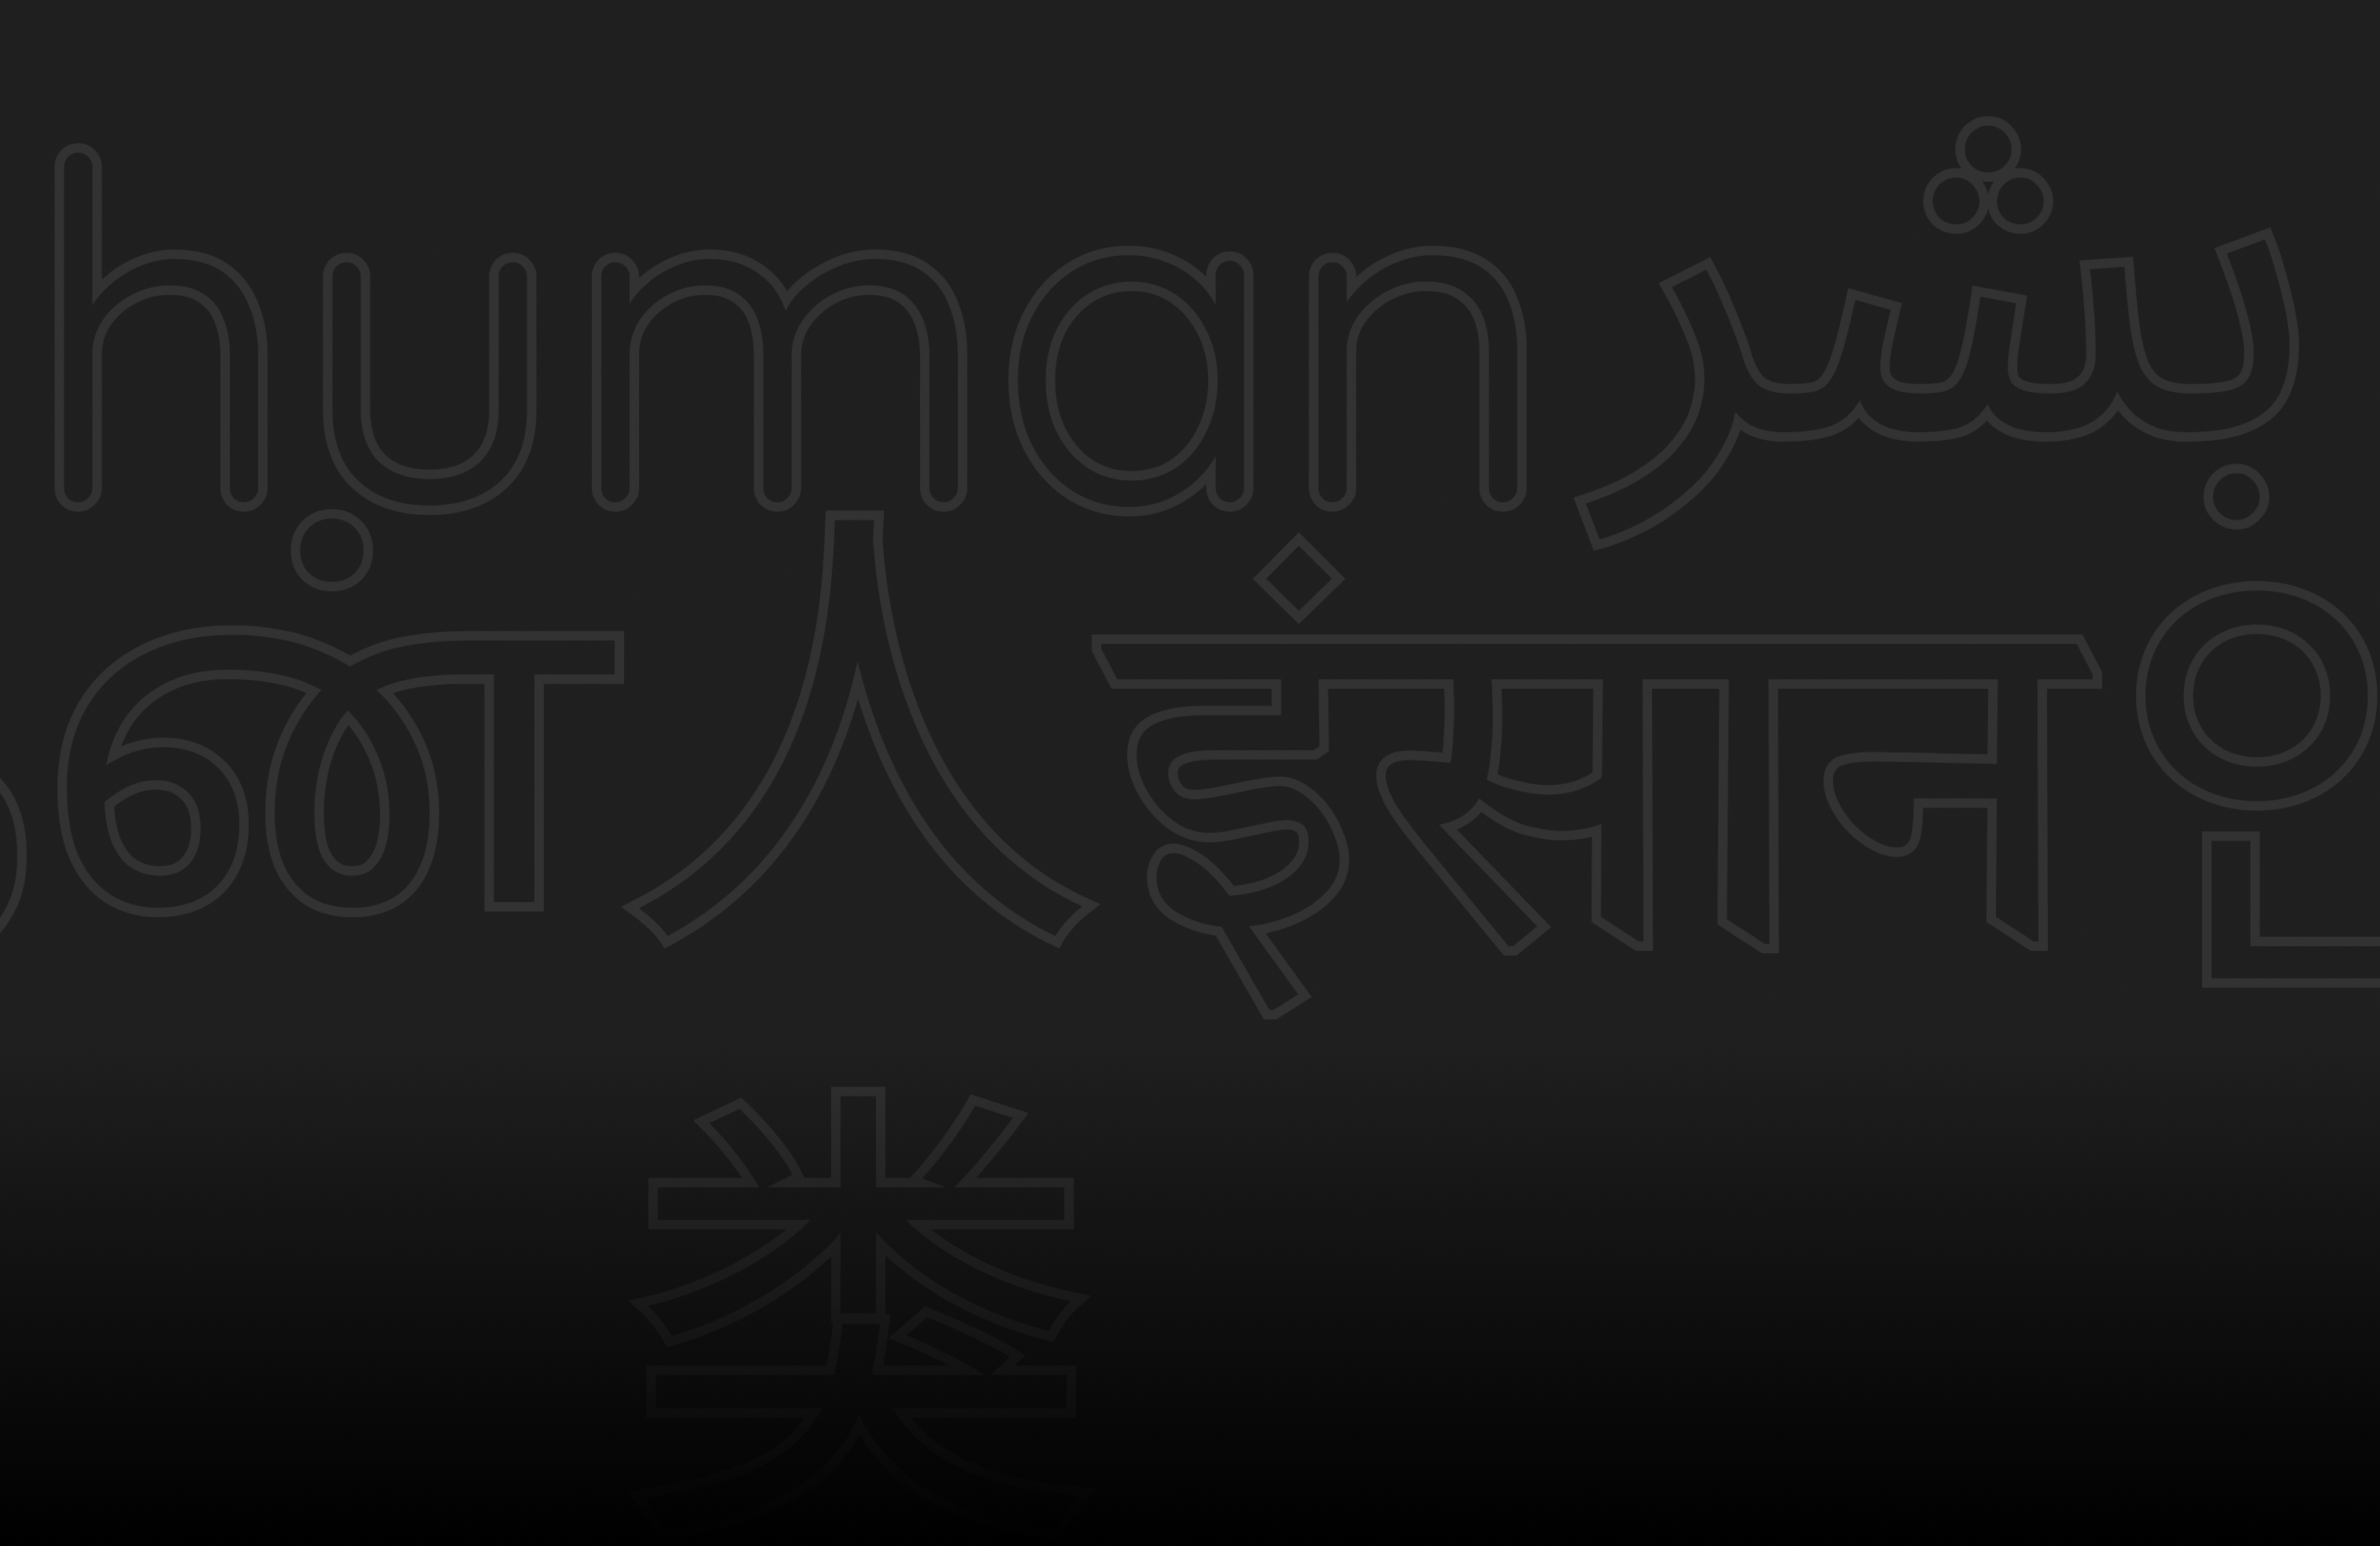 A number of languages out of which Omni supports some.